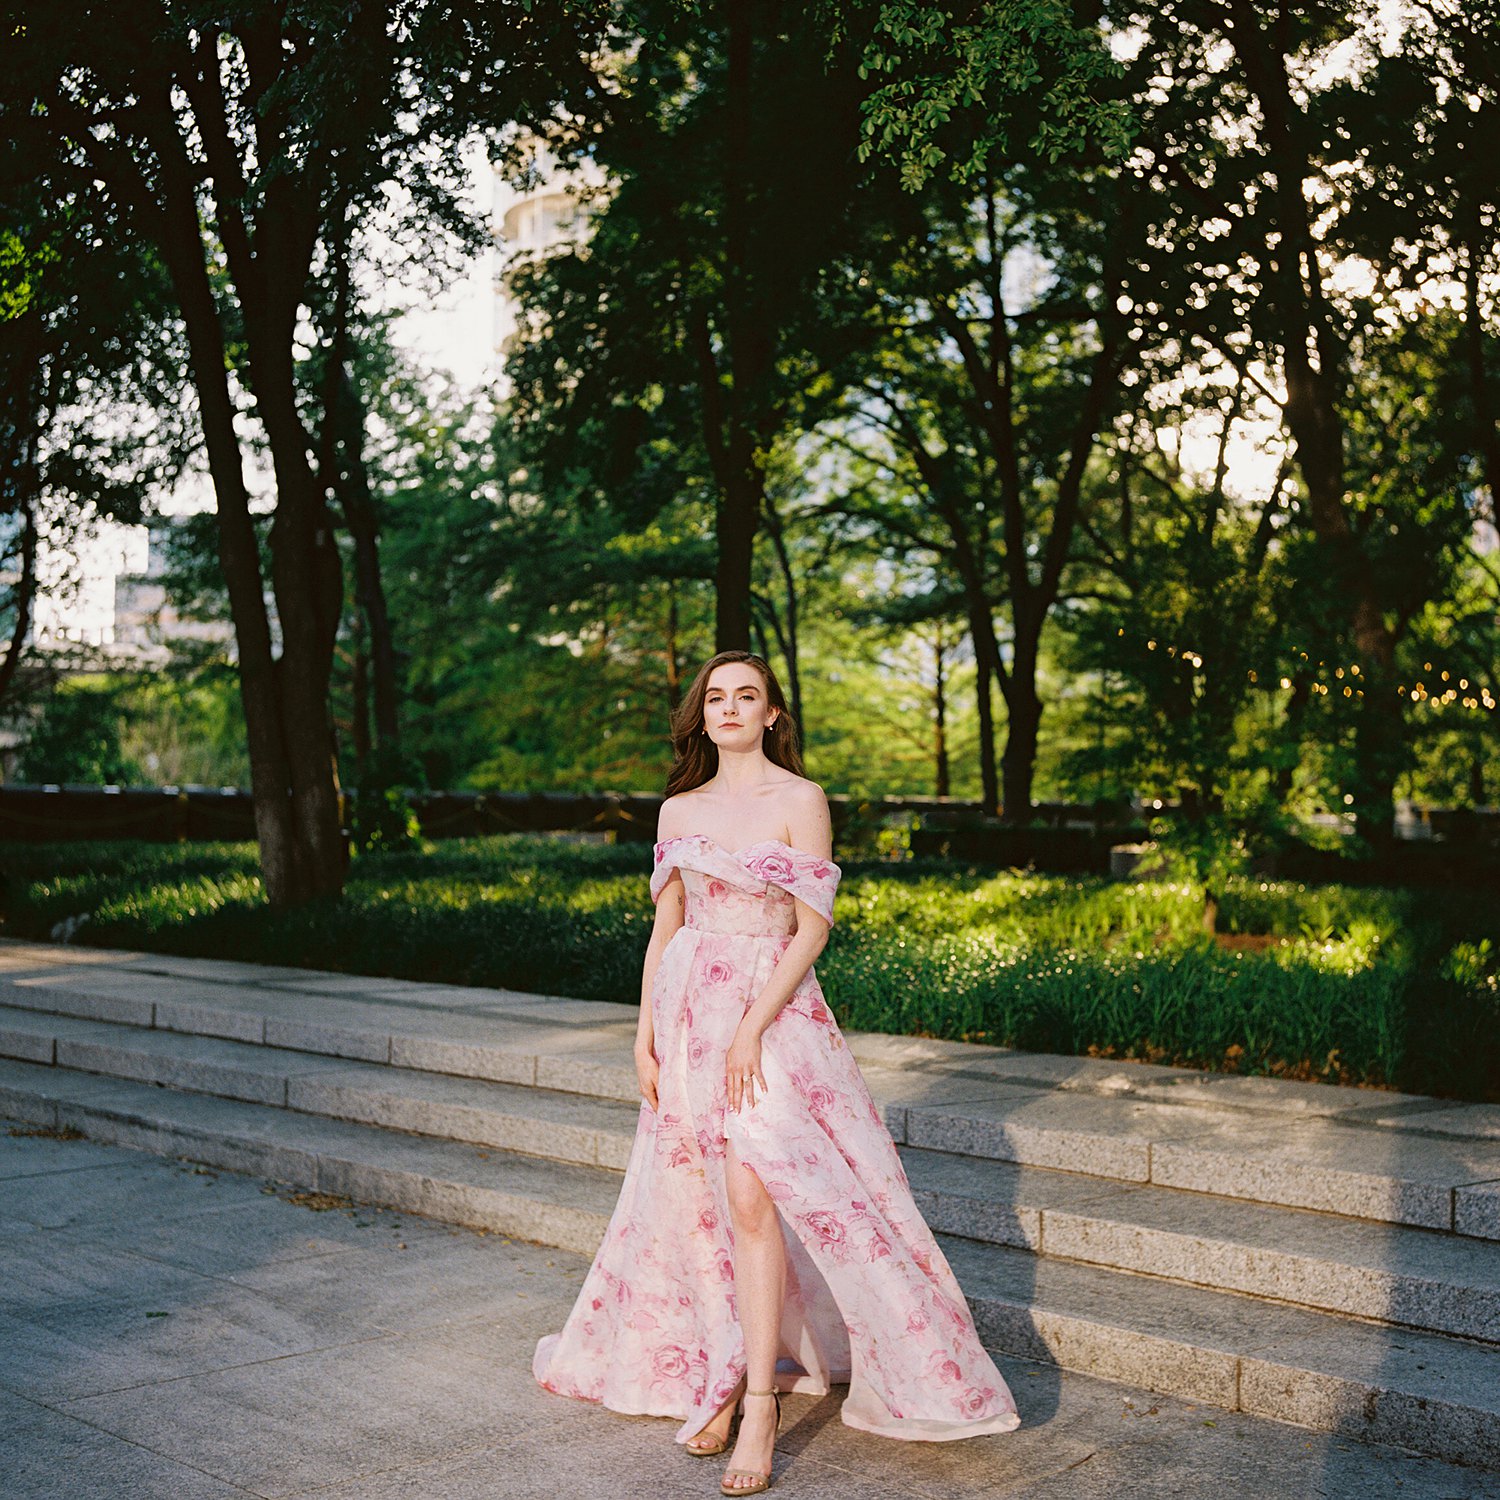 Woman in Pink floral gown in front of garden